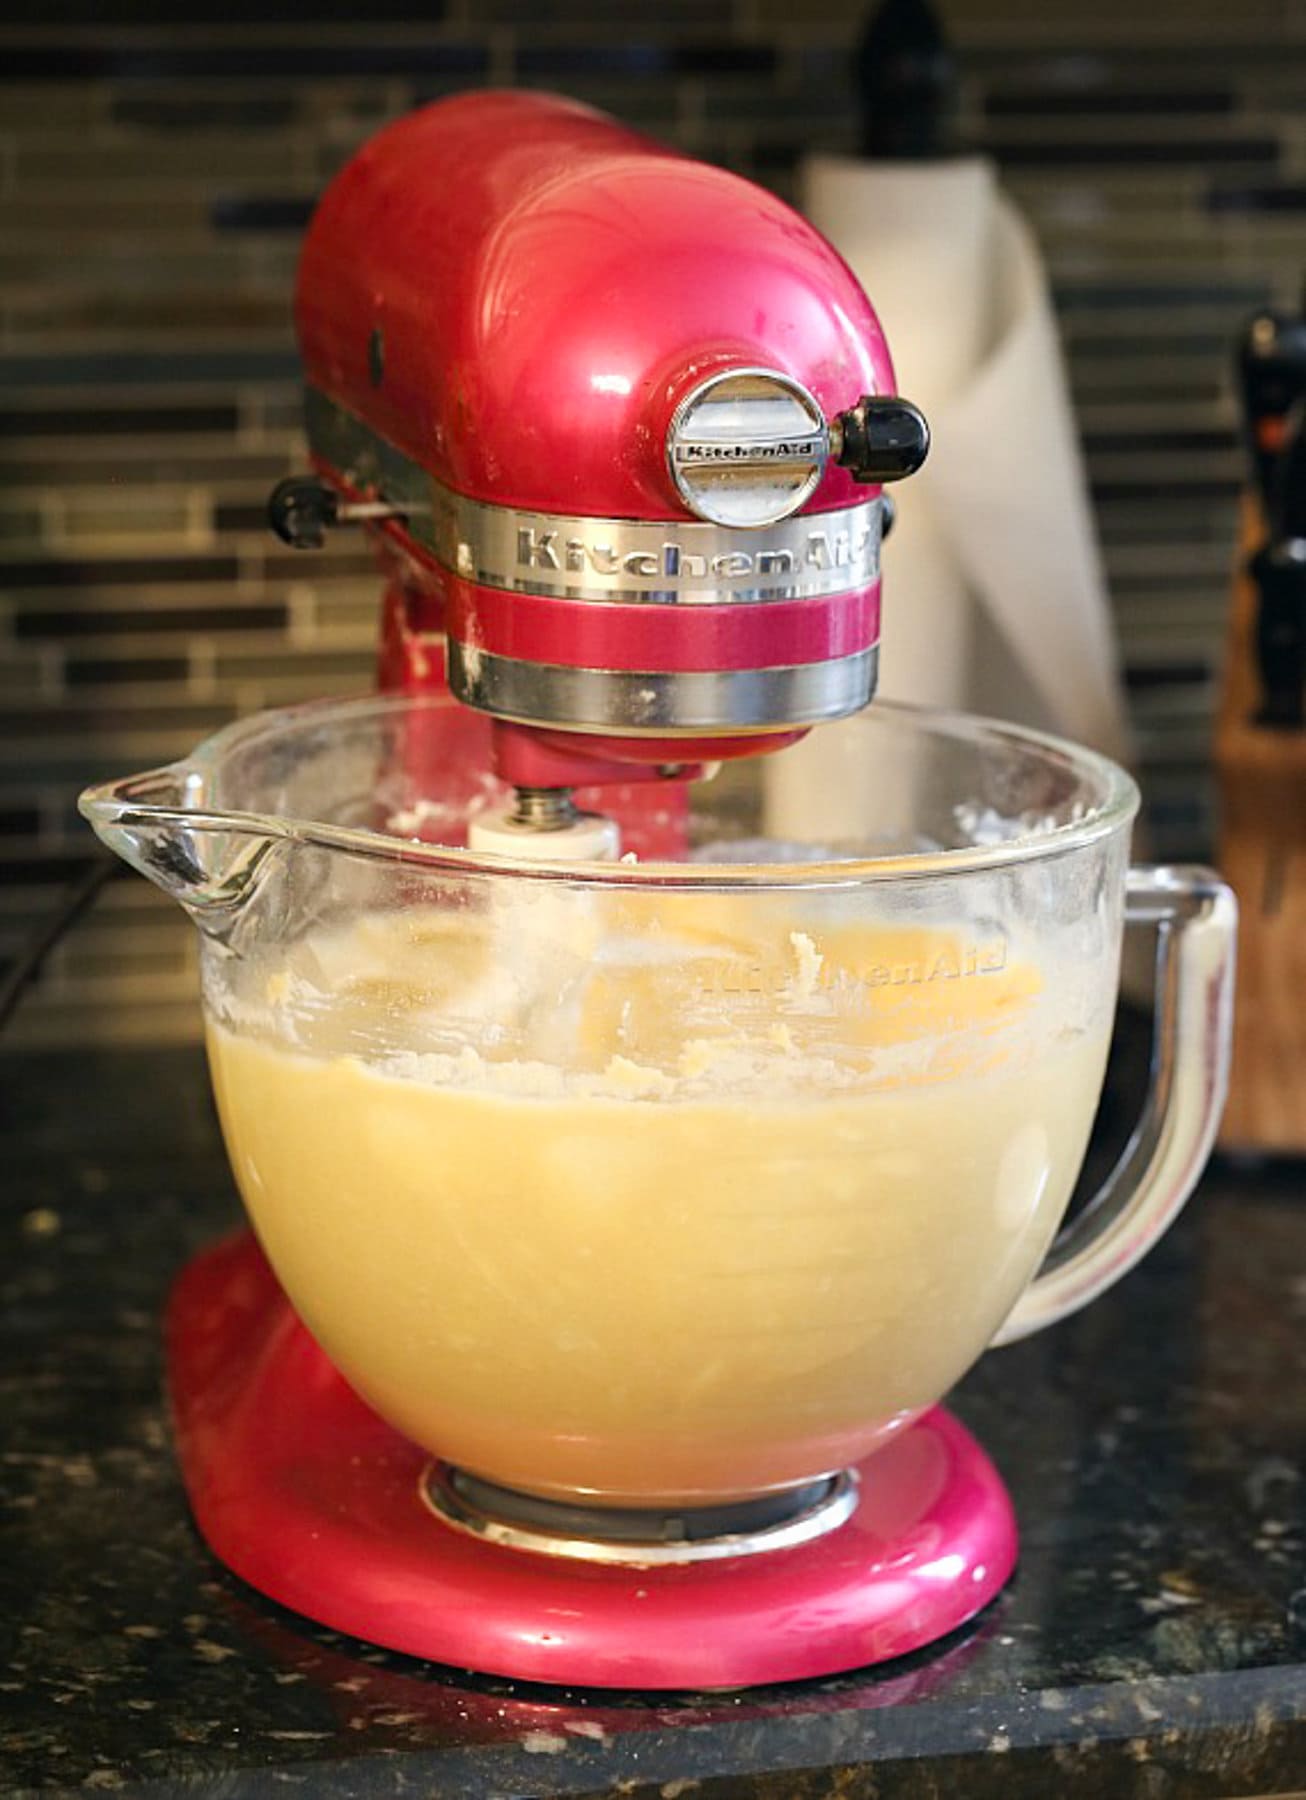 cake batter in the glass bowl of a pink stand mixer